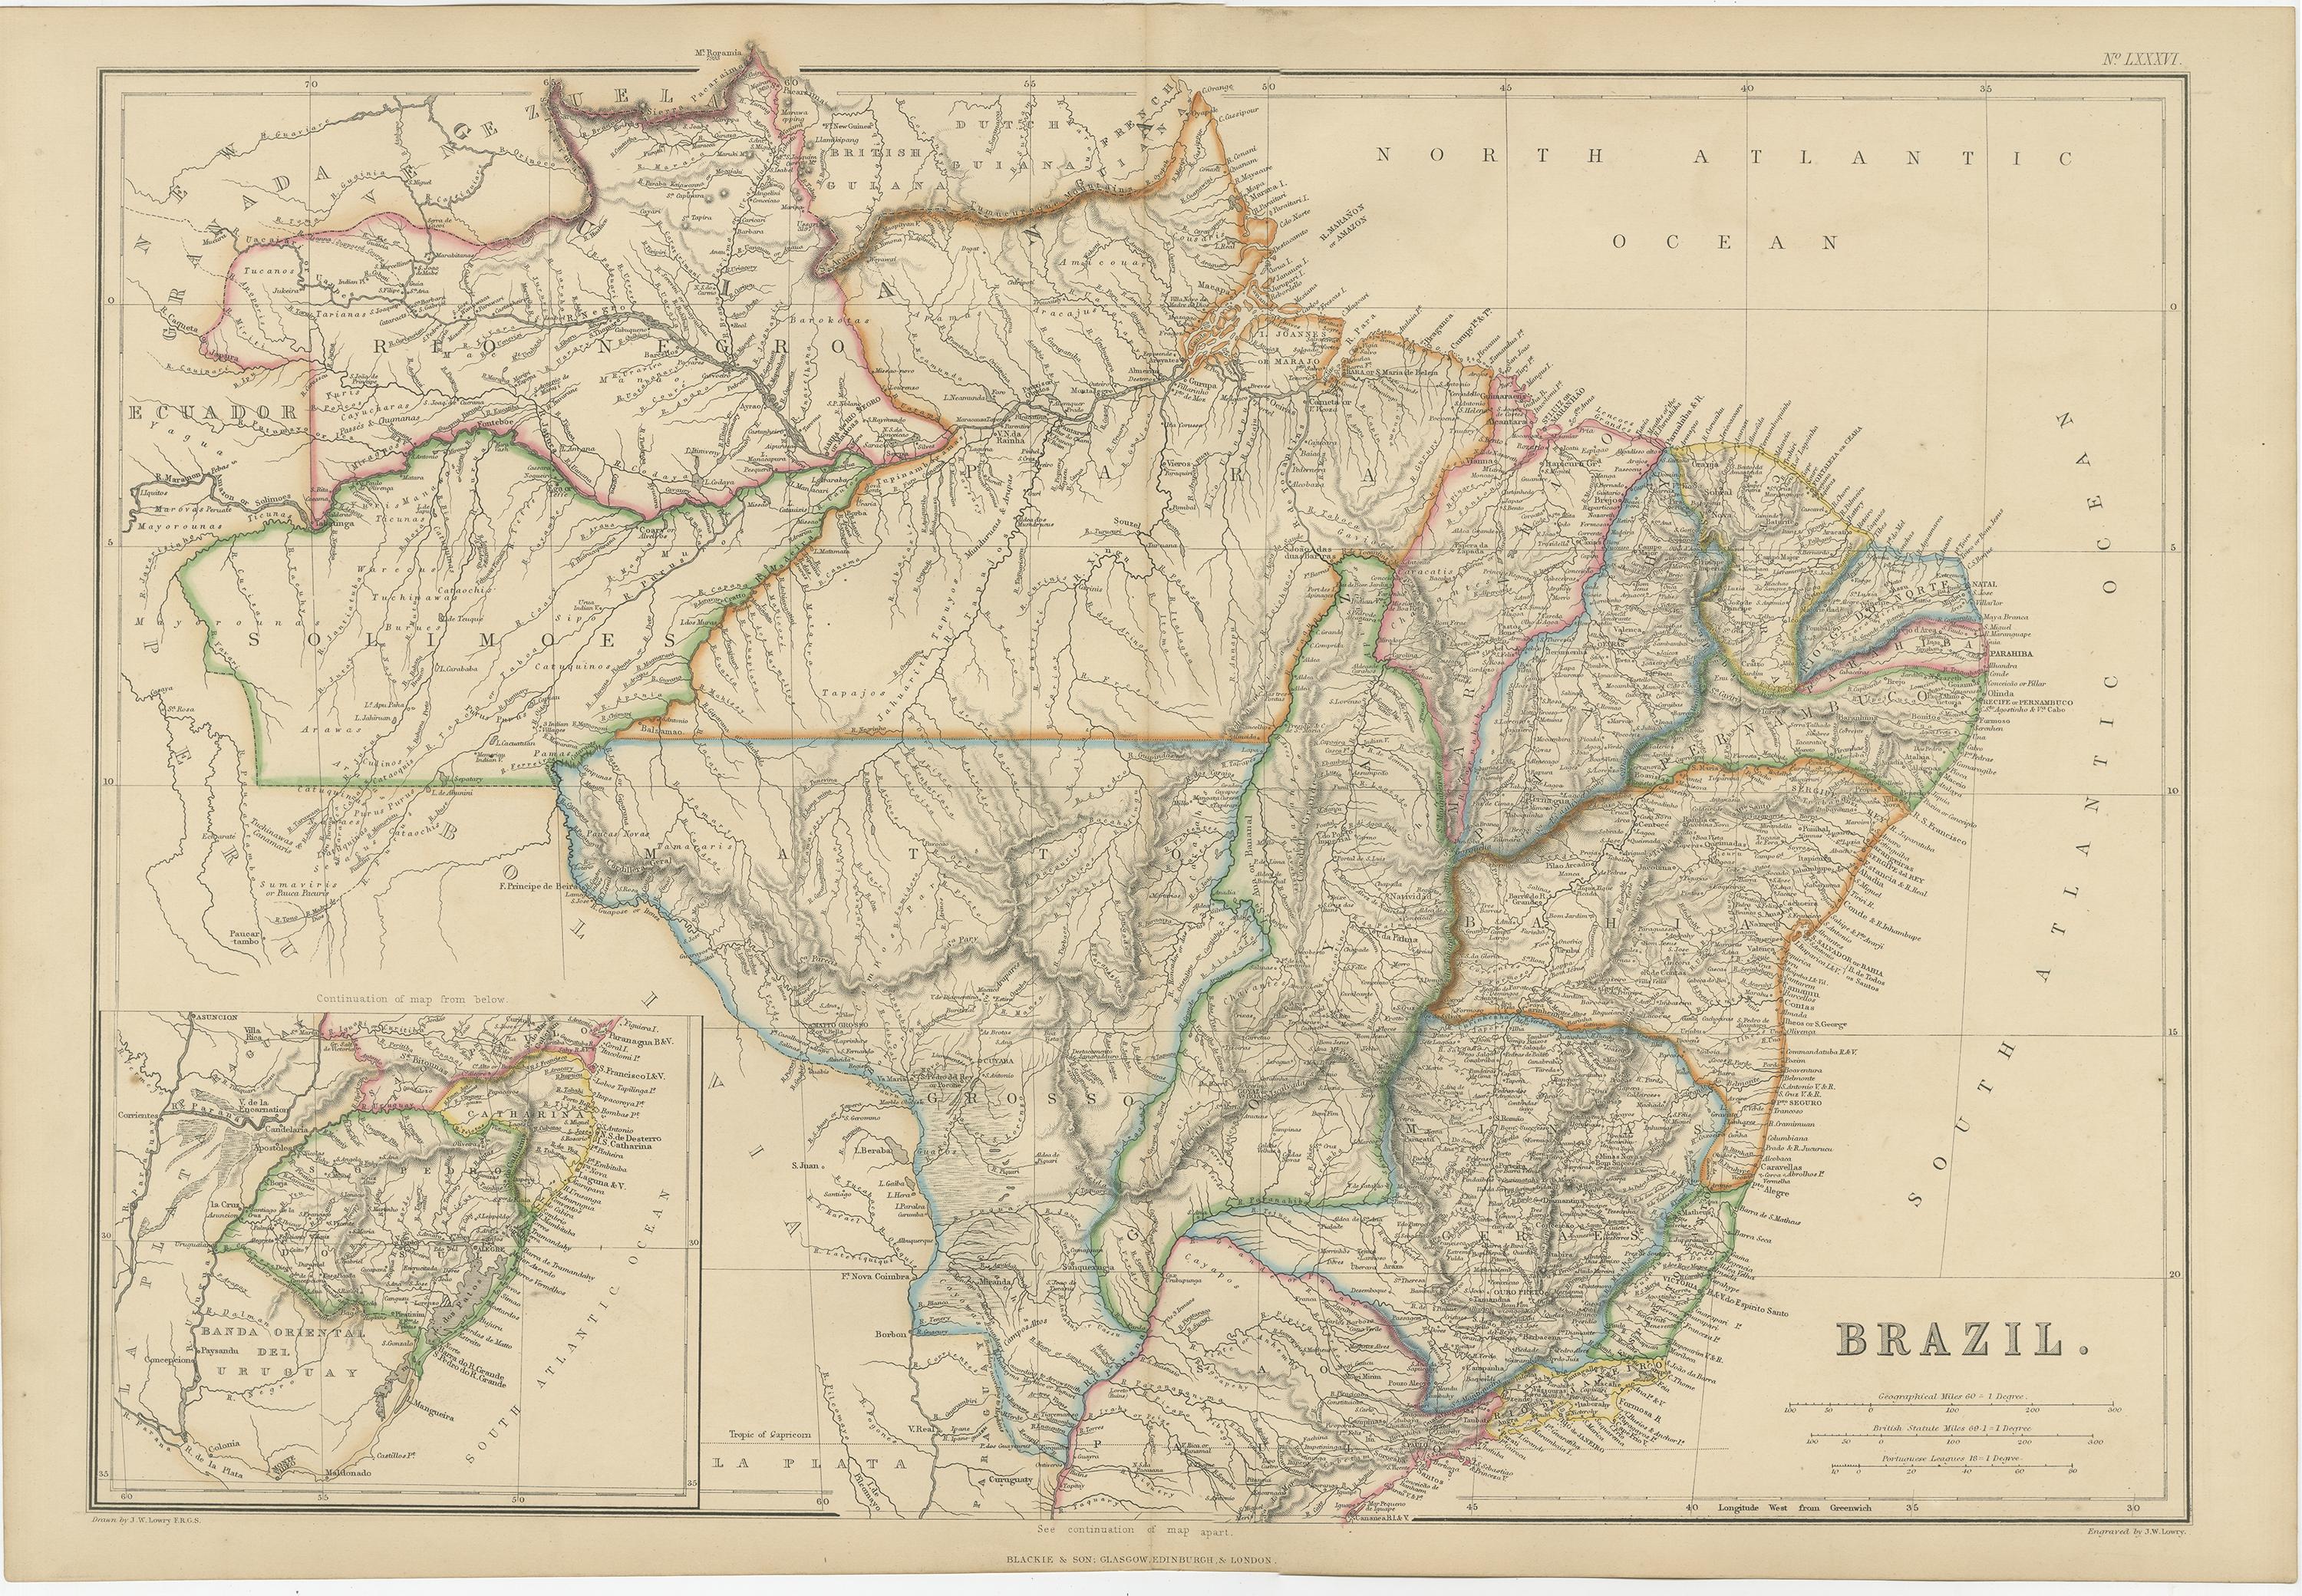 Antique map titled 'Brazil'. Original antique map of Brazil. This map originates from ‘The Imperial Atlas of Modern Geography’. Published by W. G. Blackie, 1859.